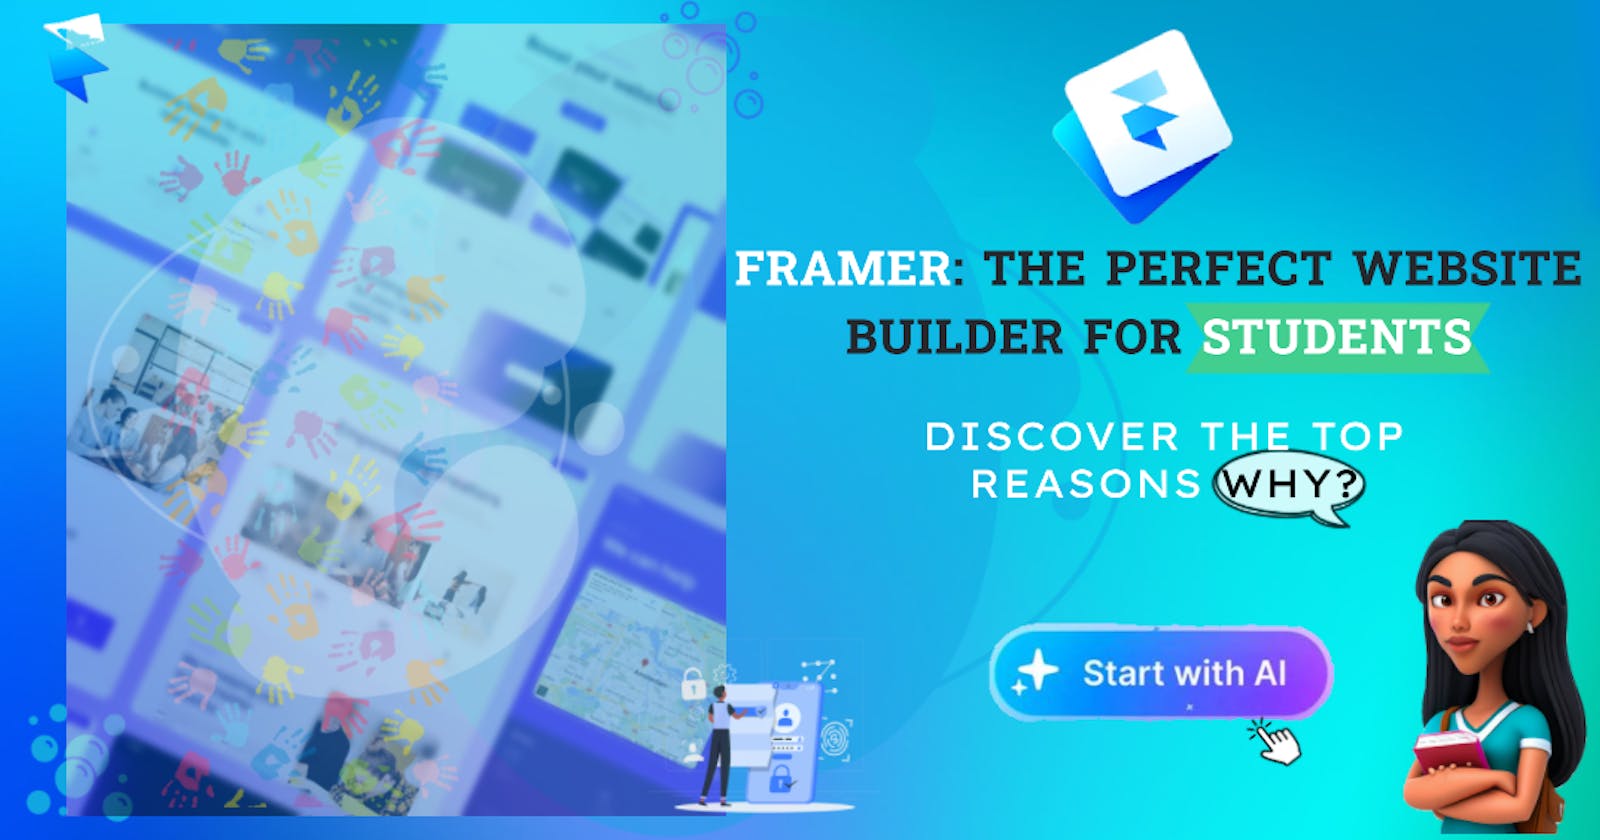 Reasons Why Framer is the Perfect Website Builder for Students